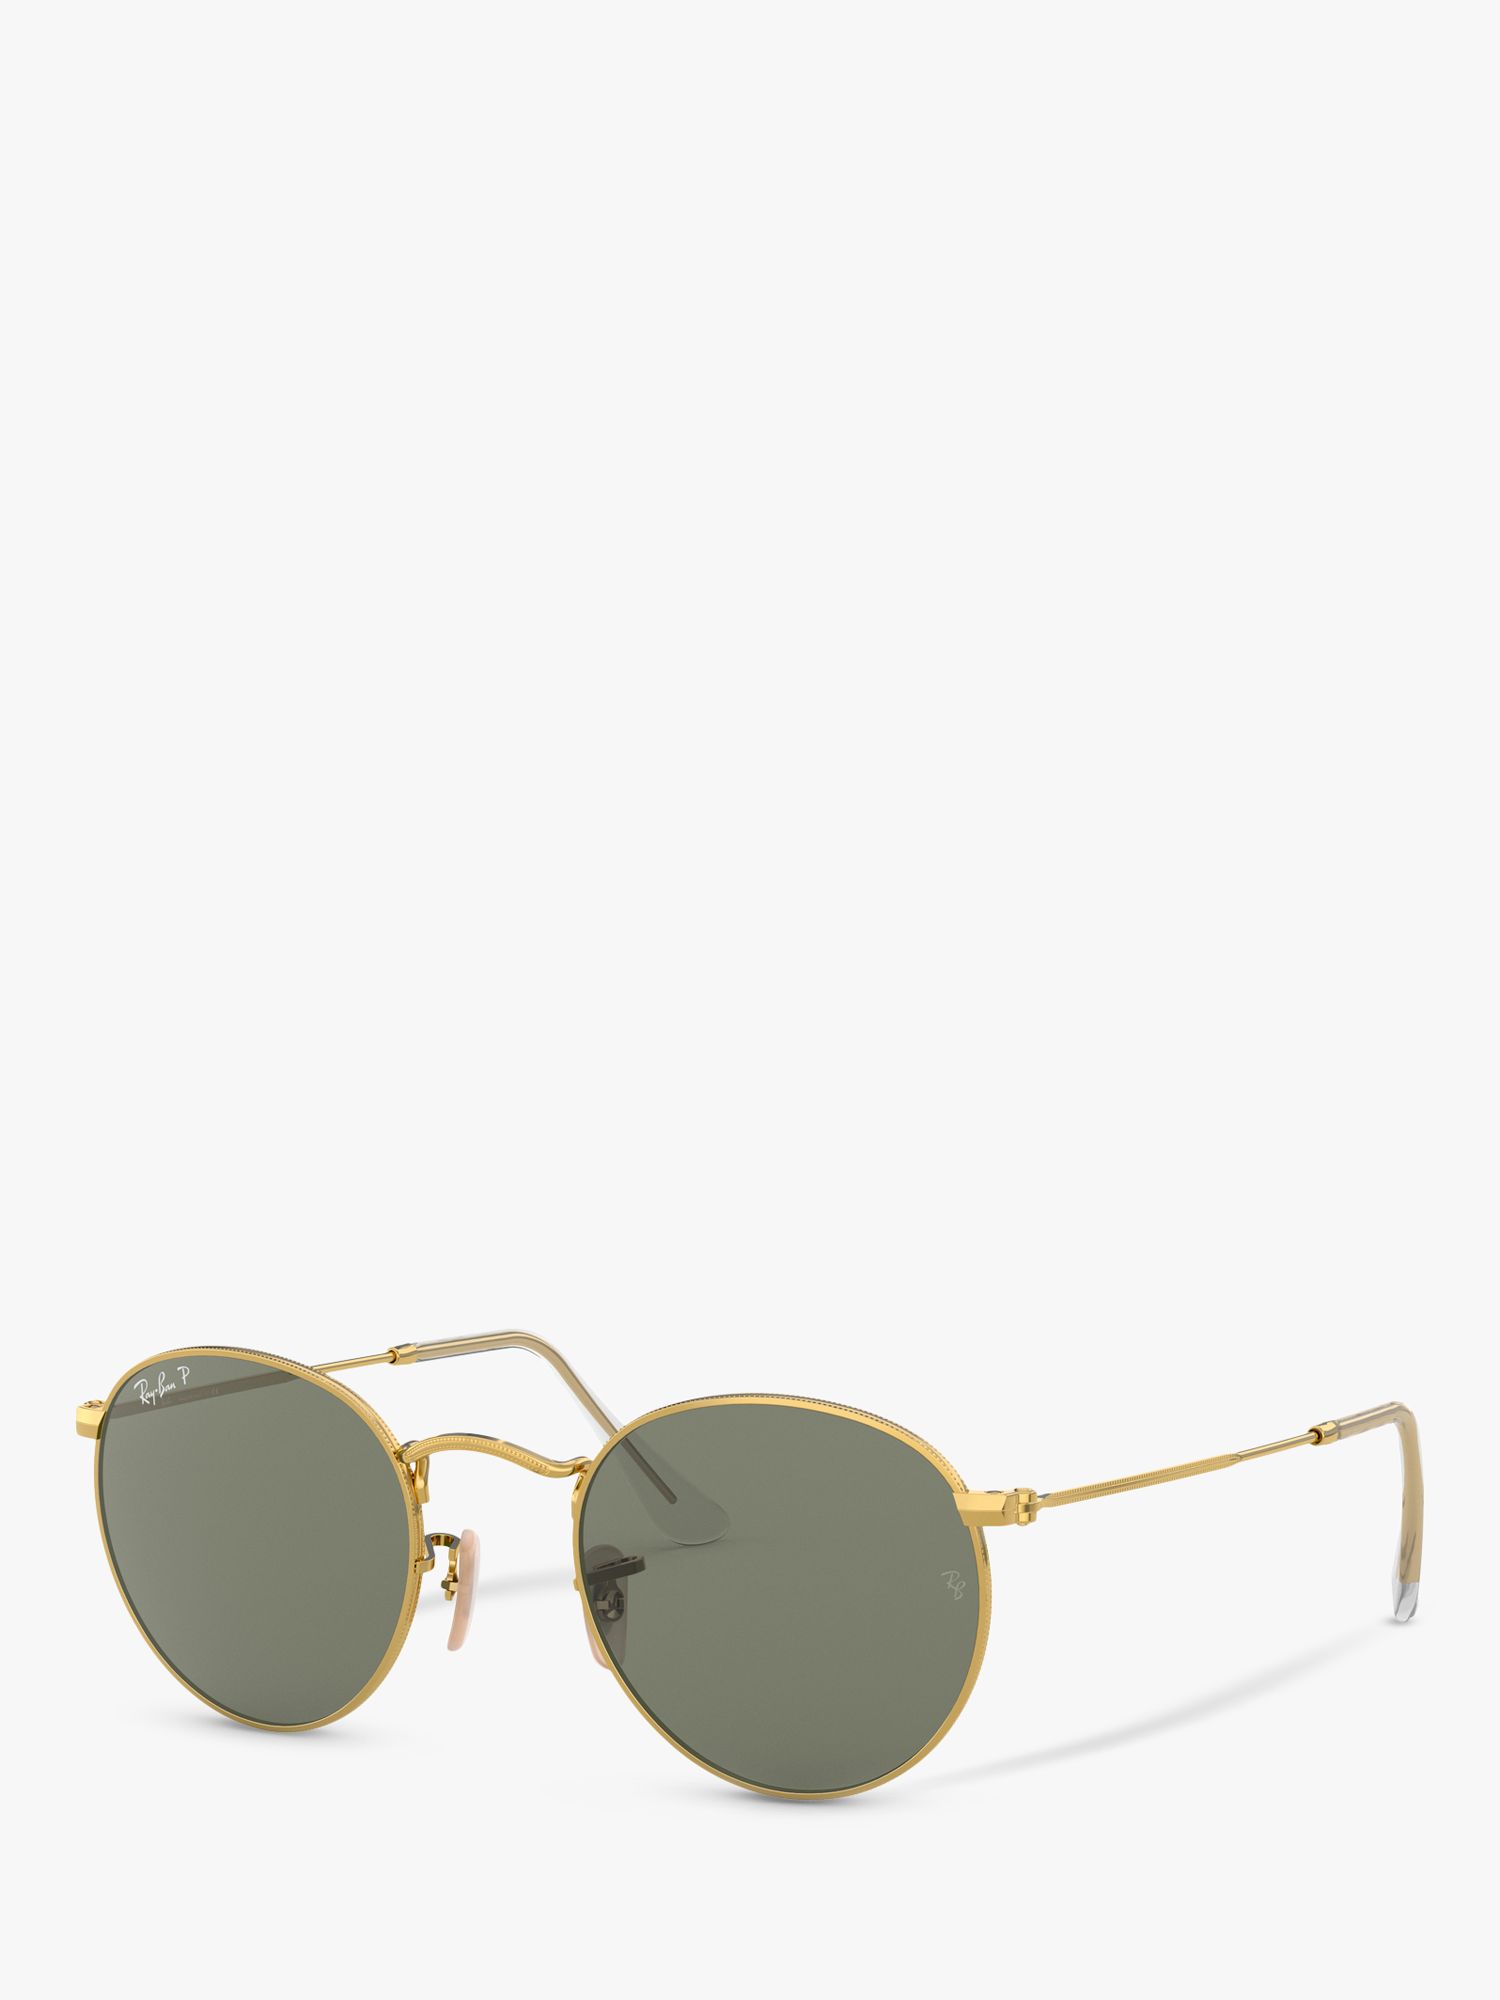 house of fraser ray ban mens